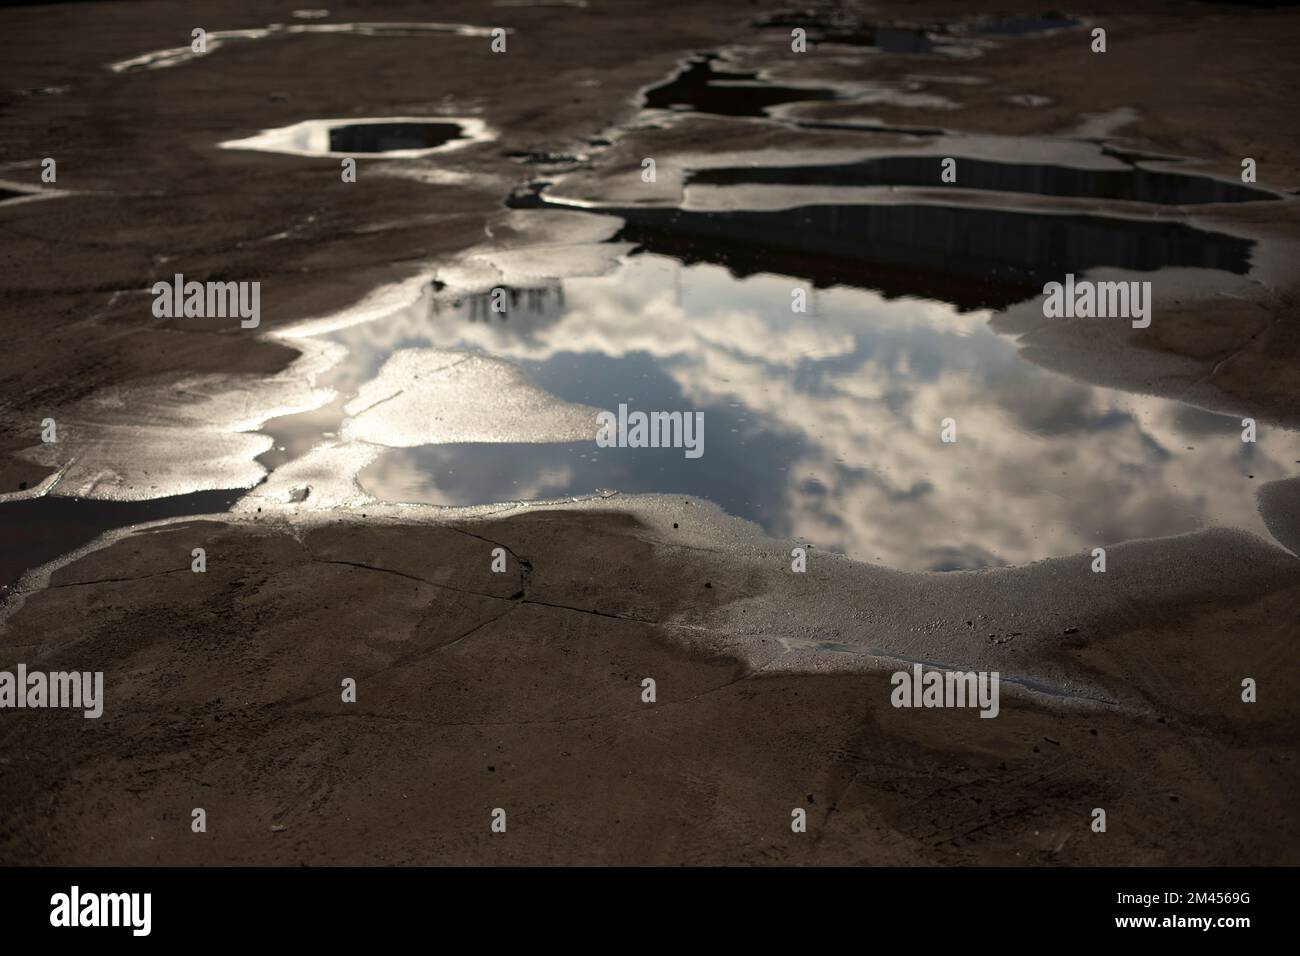 Large puddle on asphalt. Puddle after rain. Precipitation in city. Reflection of clouds in water. Stock Photo